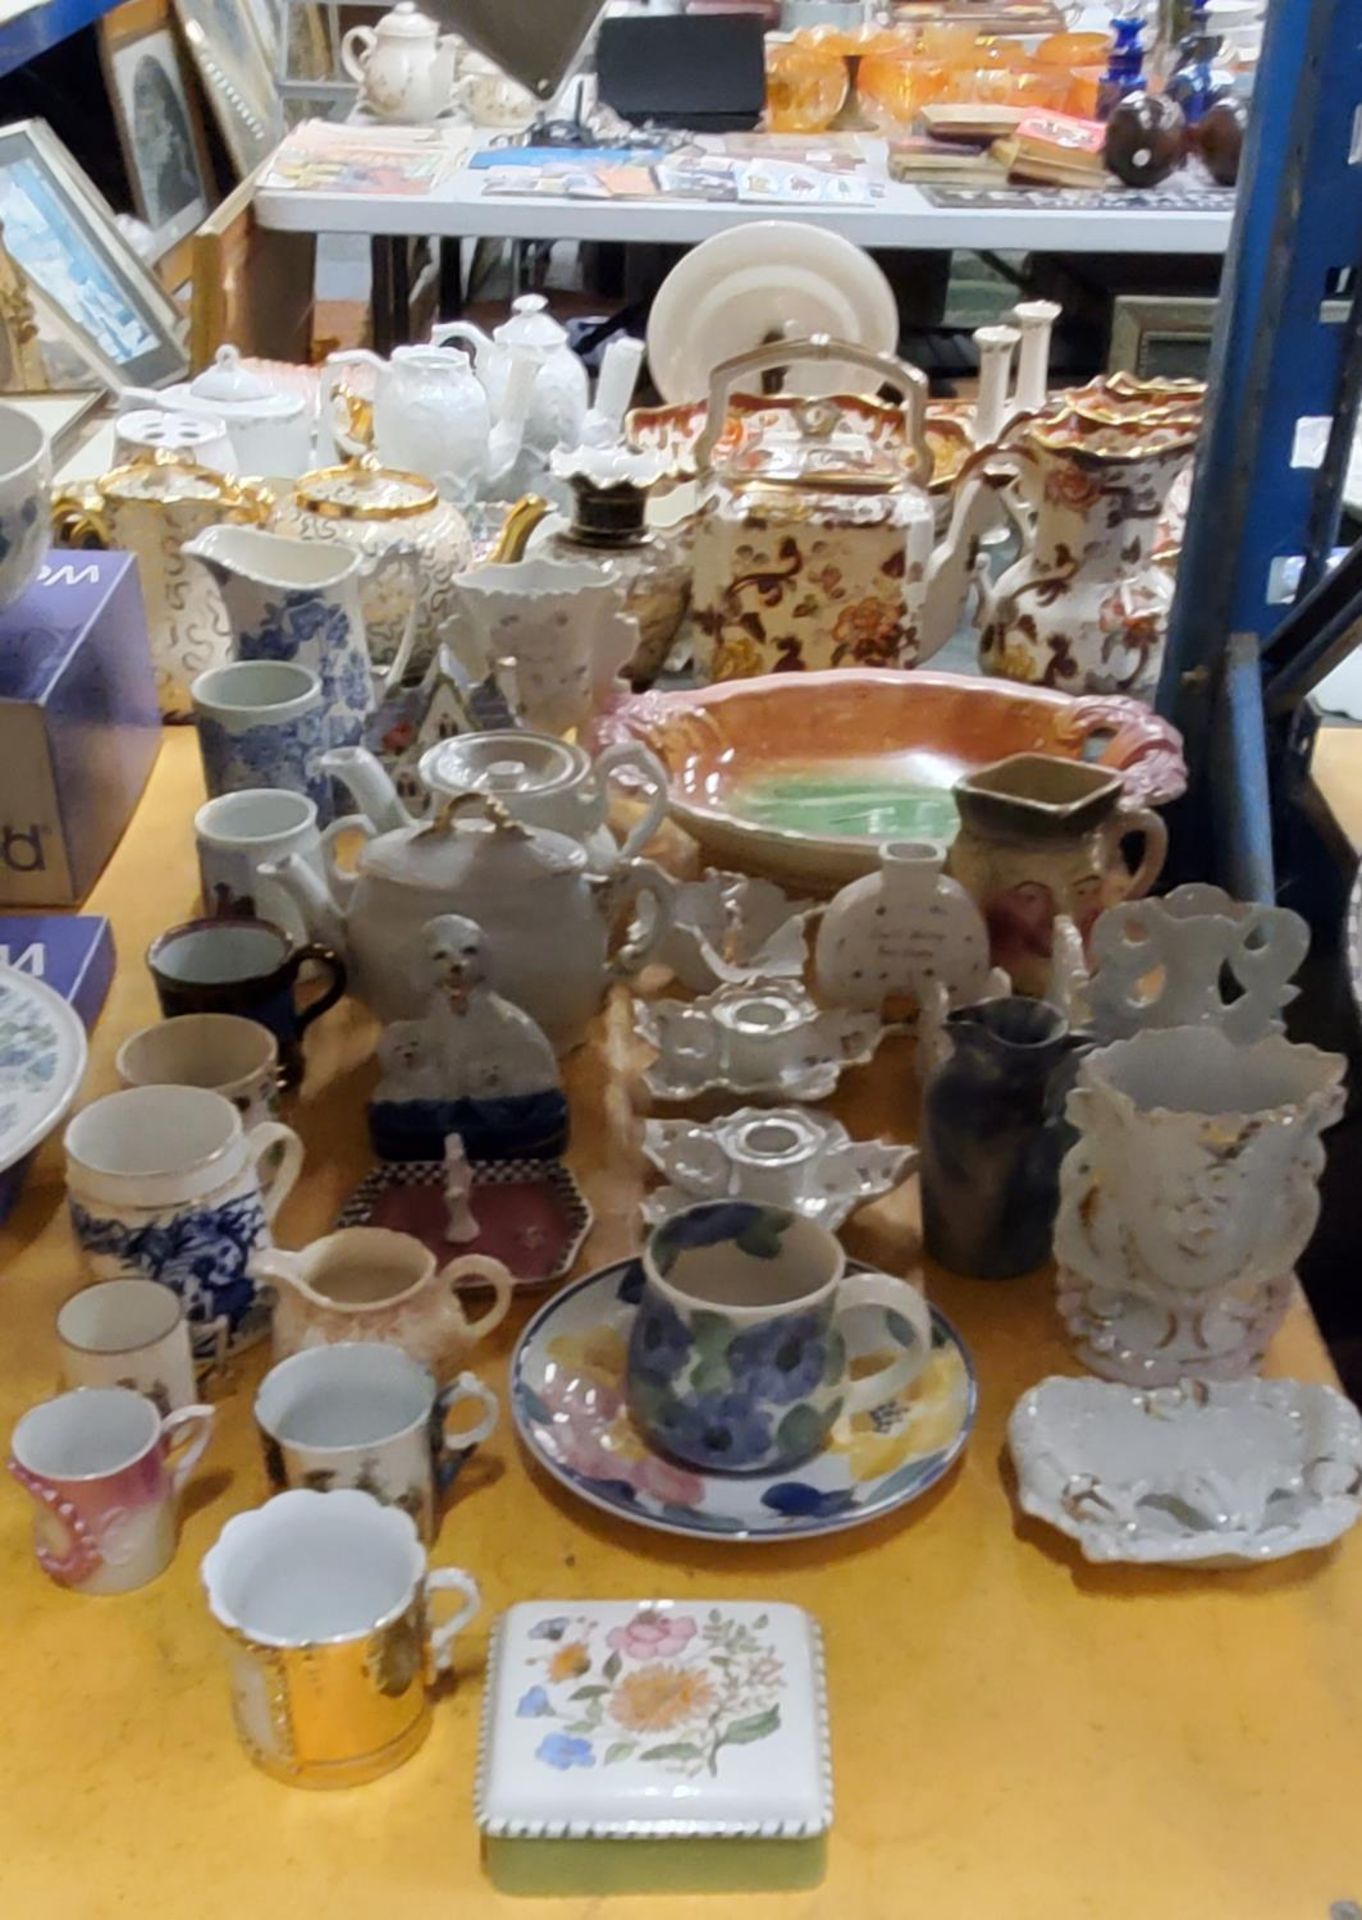 A QUANTITY OF VINTAGE CERAMIC ITEMS TO INCLUDE TEAPOTS, JUGS, VASES, CUPS, CANDLESTICKS, ETC